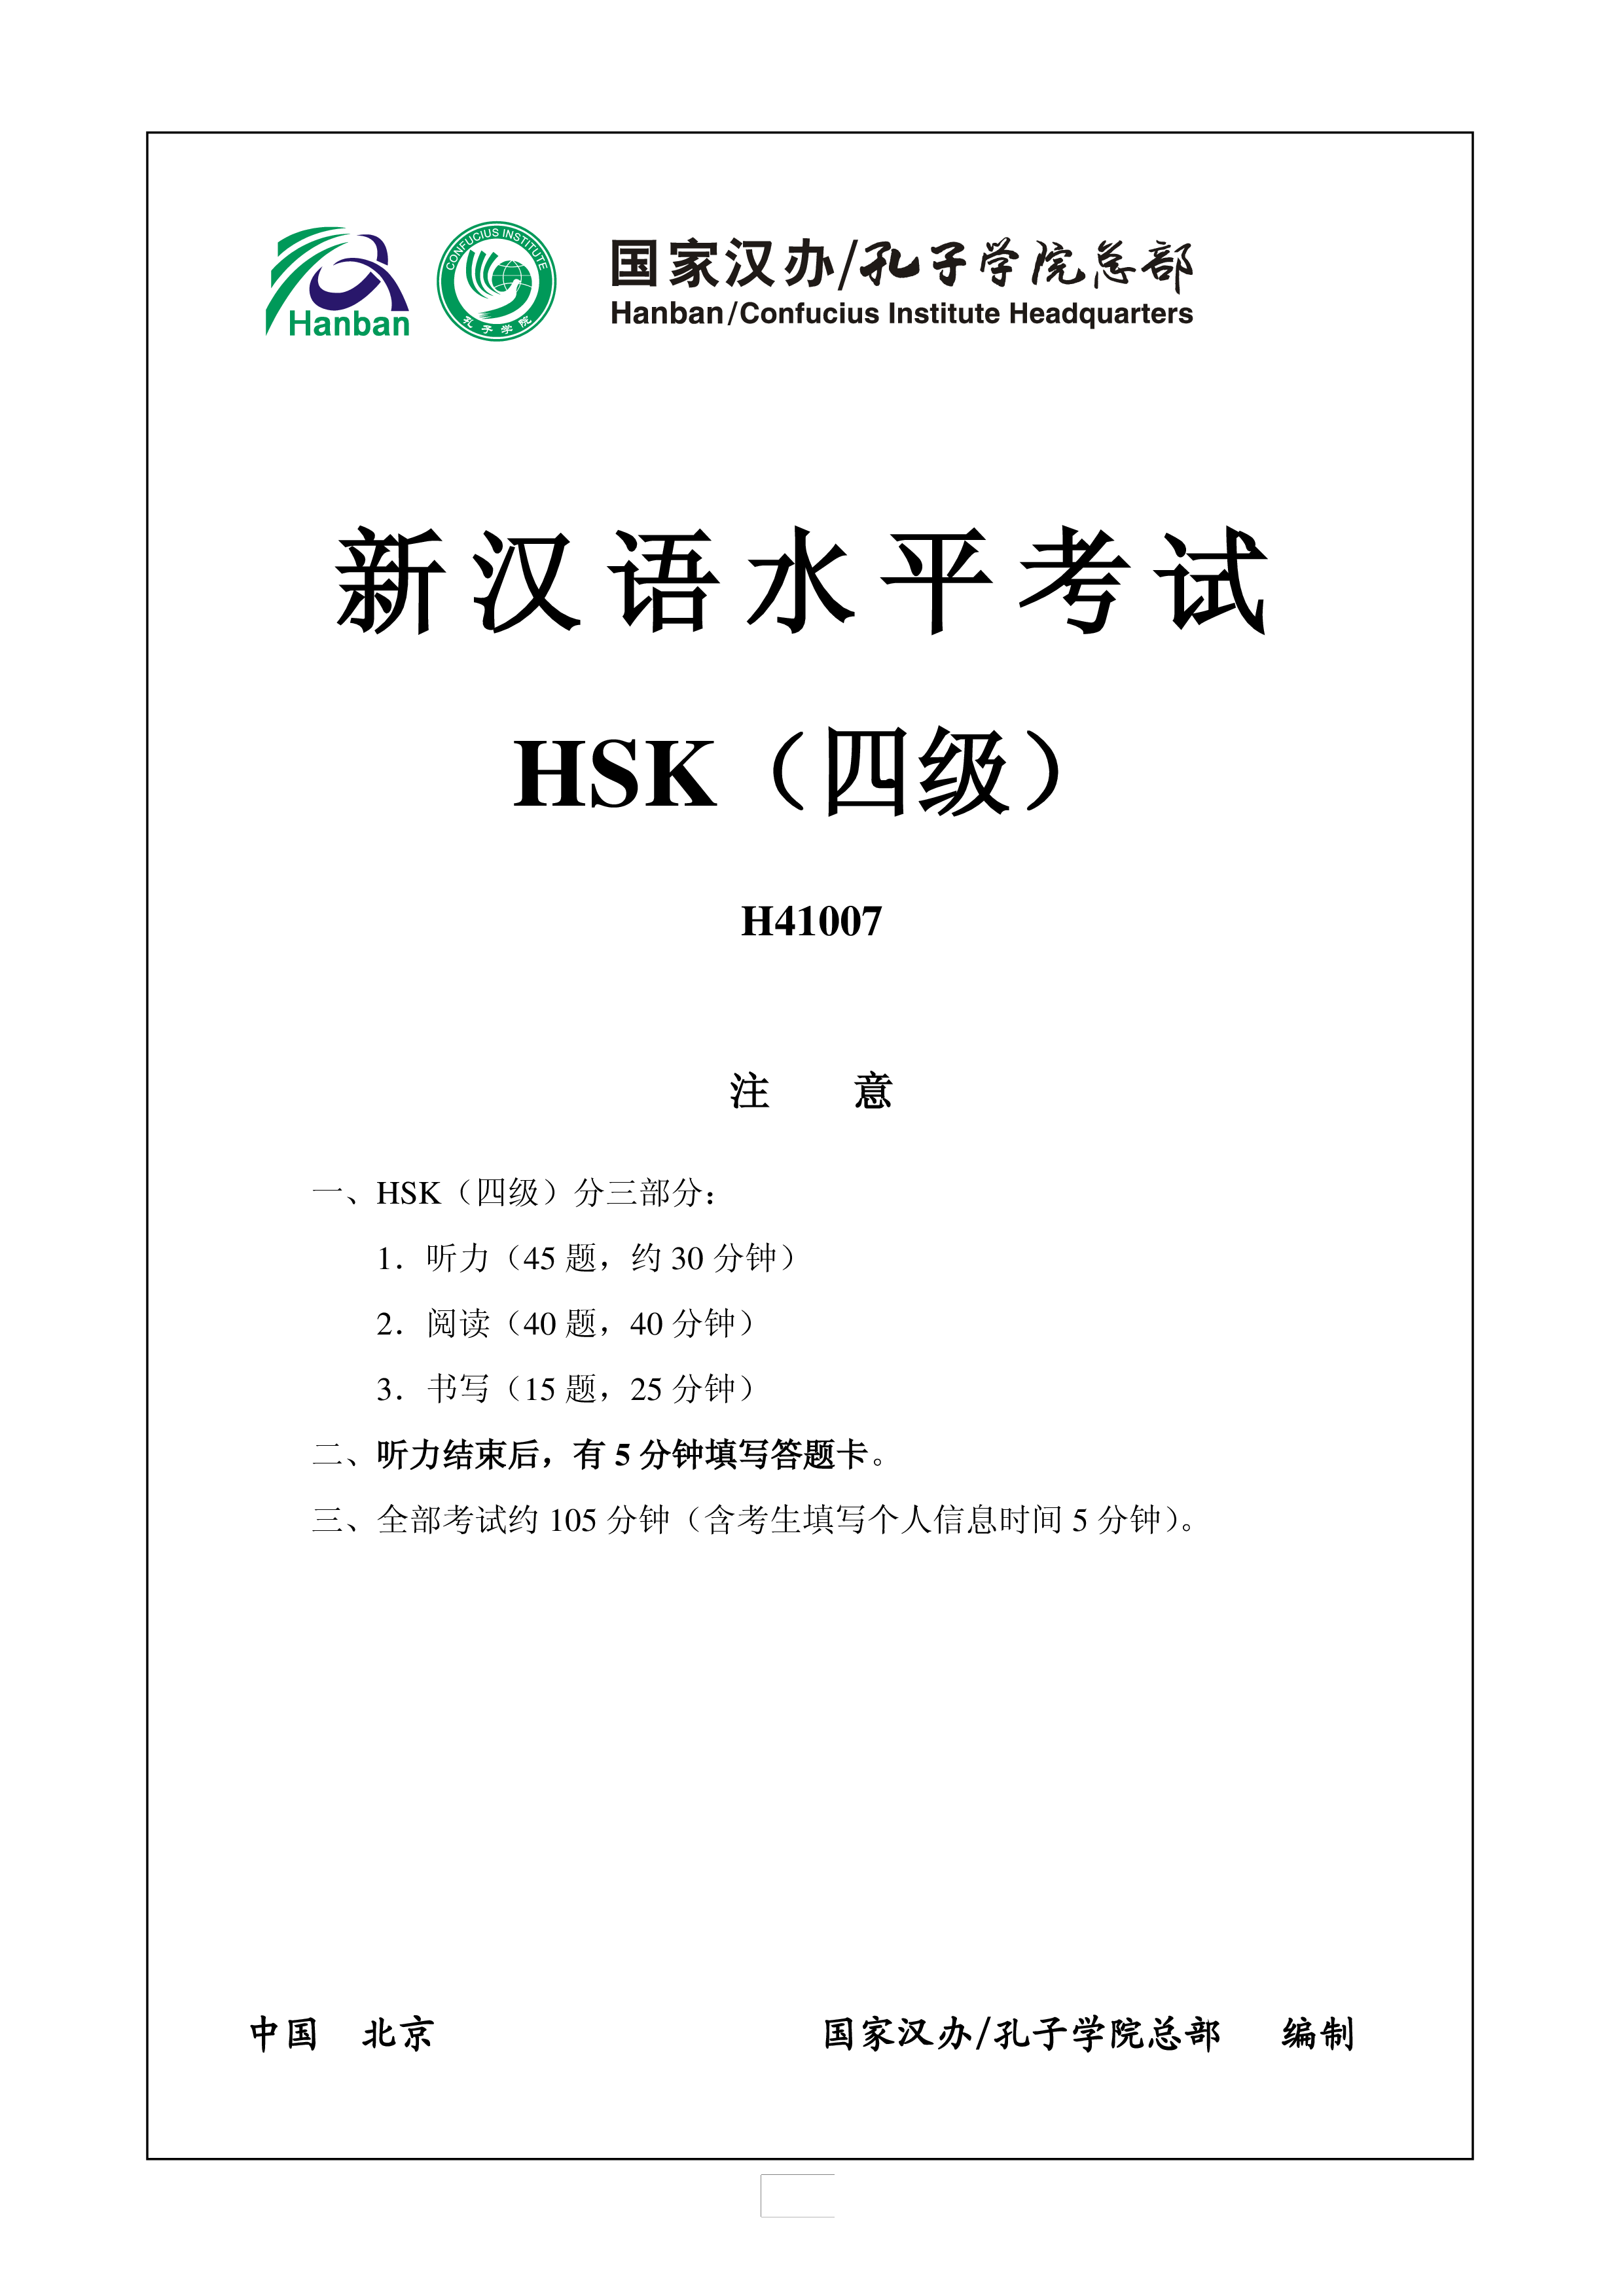 h41007 chinese exam hsk 4 incl audio and answers voorbeeld afbeelding 